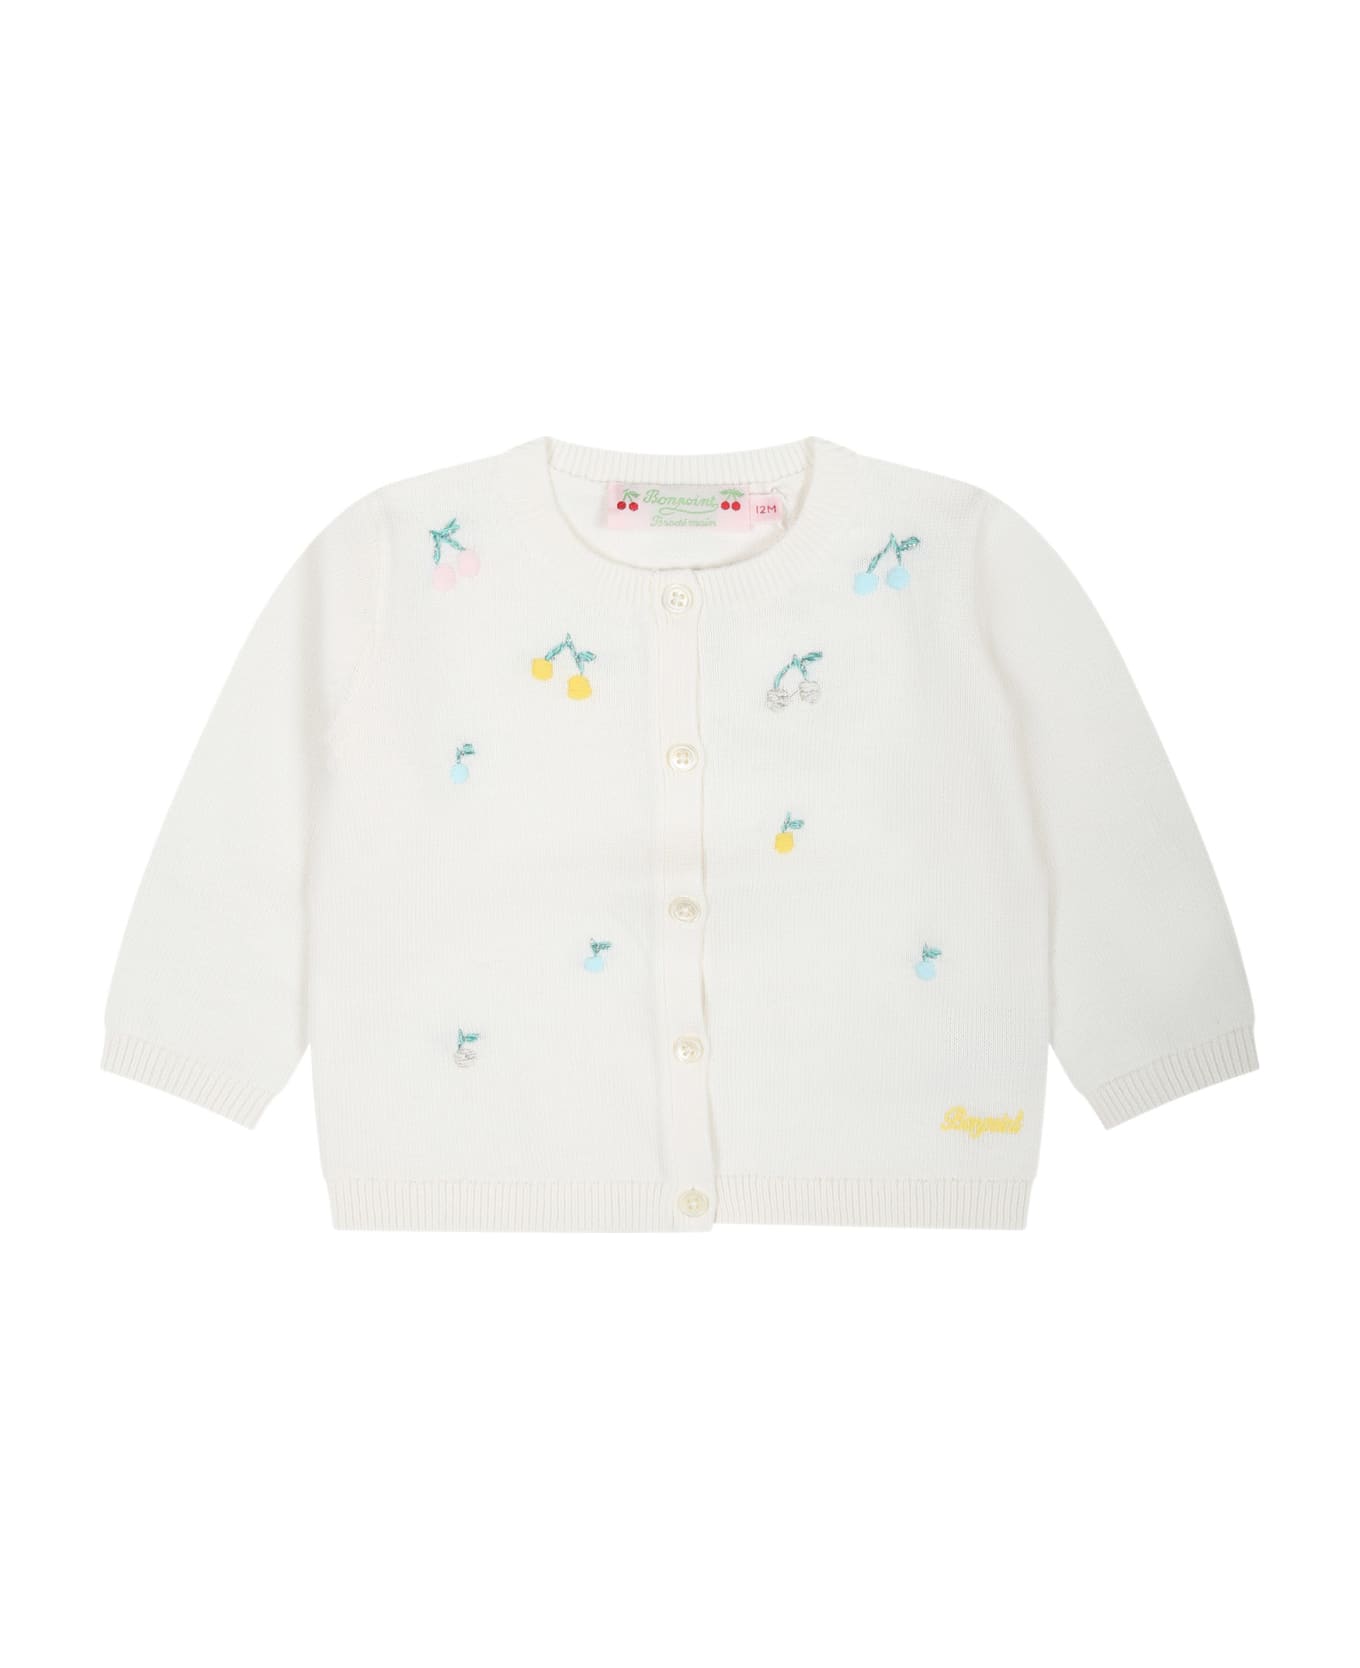 Bonpoint White Cardigan For Baby Girl With All-over Embroidered Cherries - Upb Blanc Lait